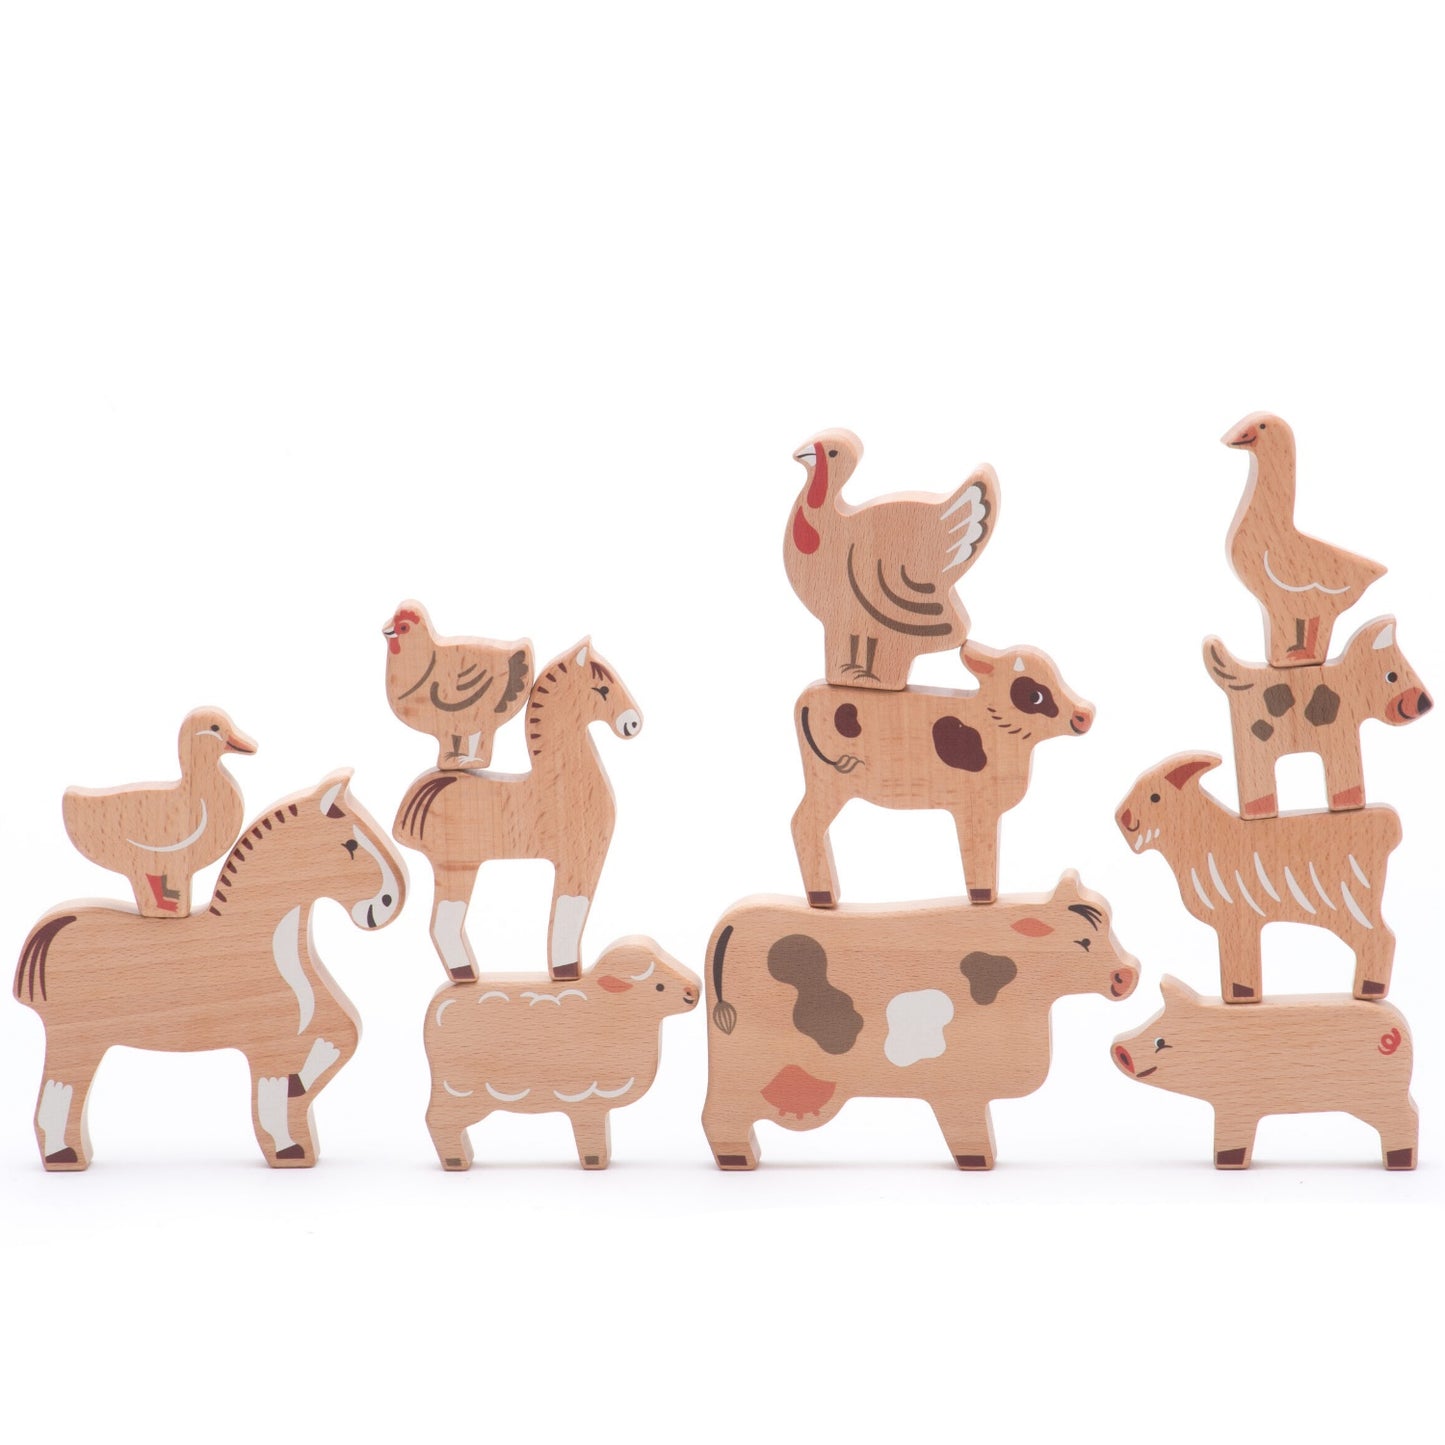 Hand Crafted Wooden Toys